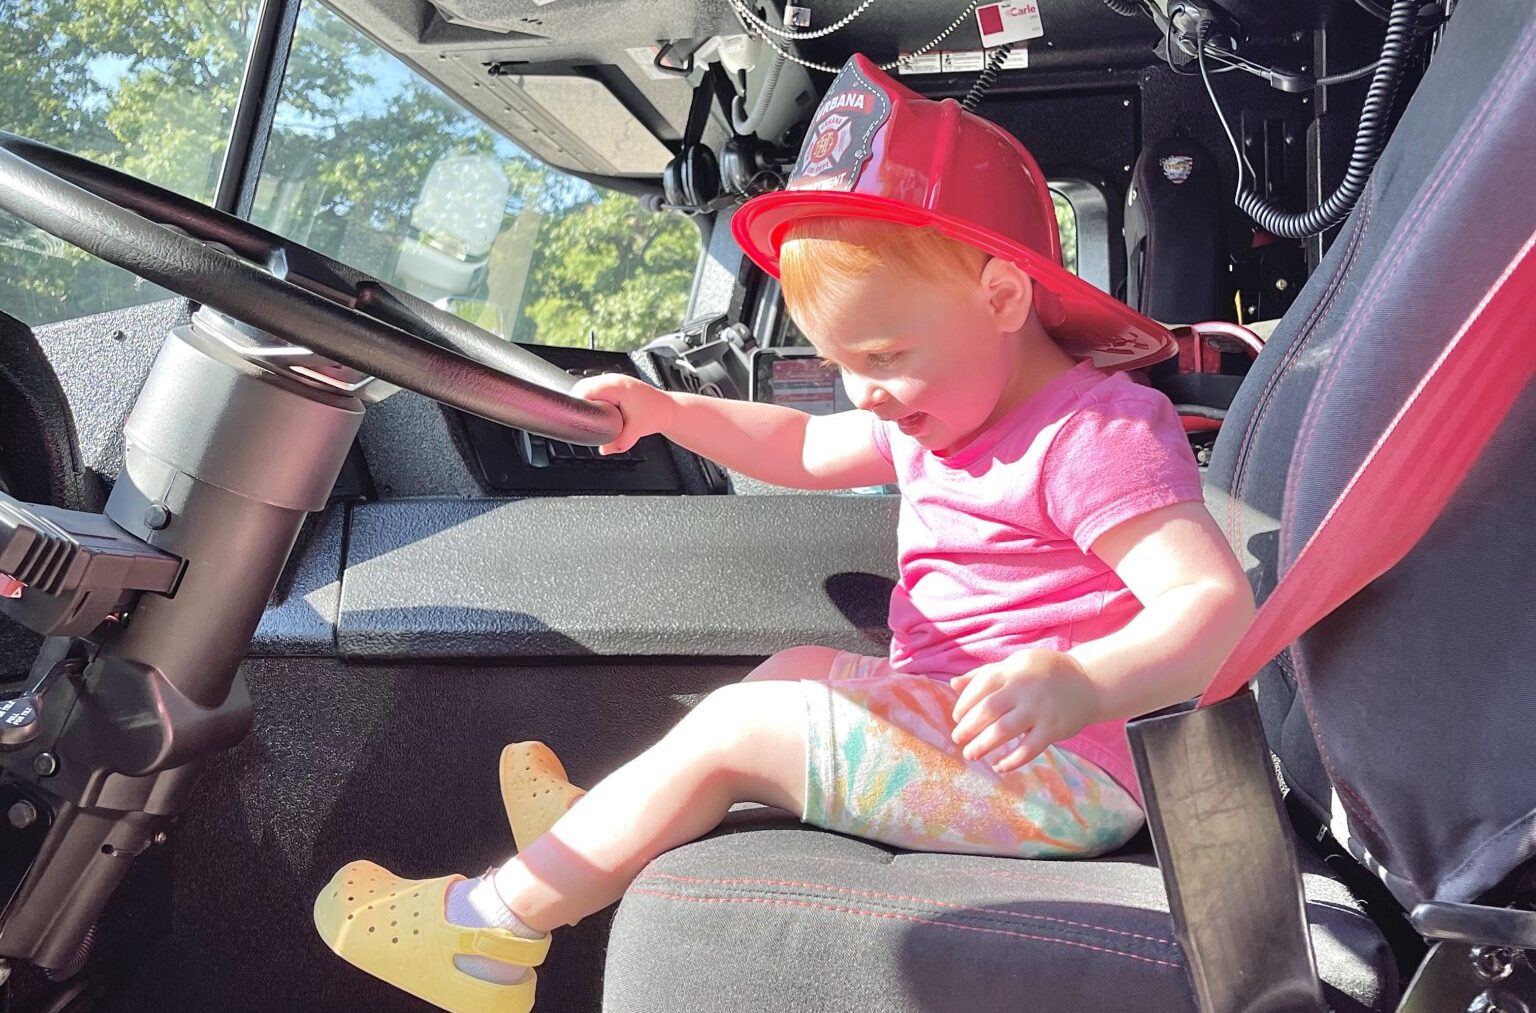 A young girl in a plastic fire department toy helmet sits at the wheel of a fire truck.